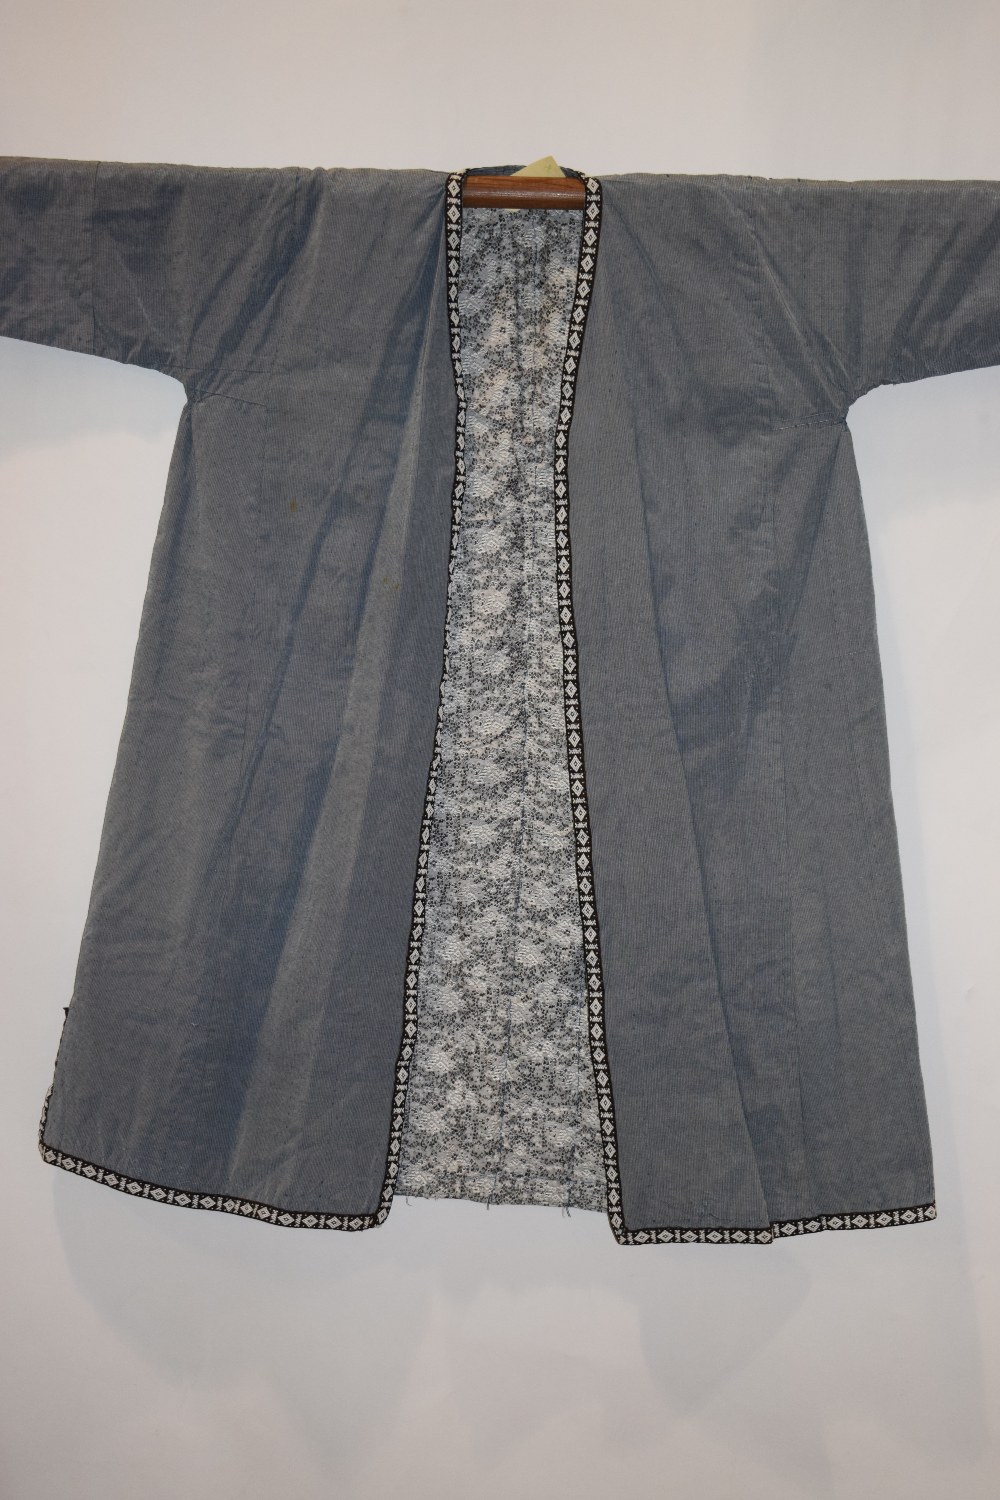 Two Uzbekistan or Afghanistan coats, 20th century, one silk satin with stripes in shades of - Image 11 of 16